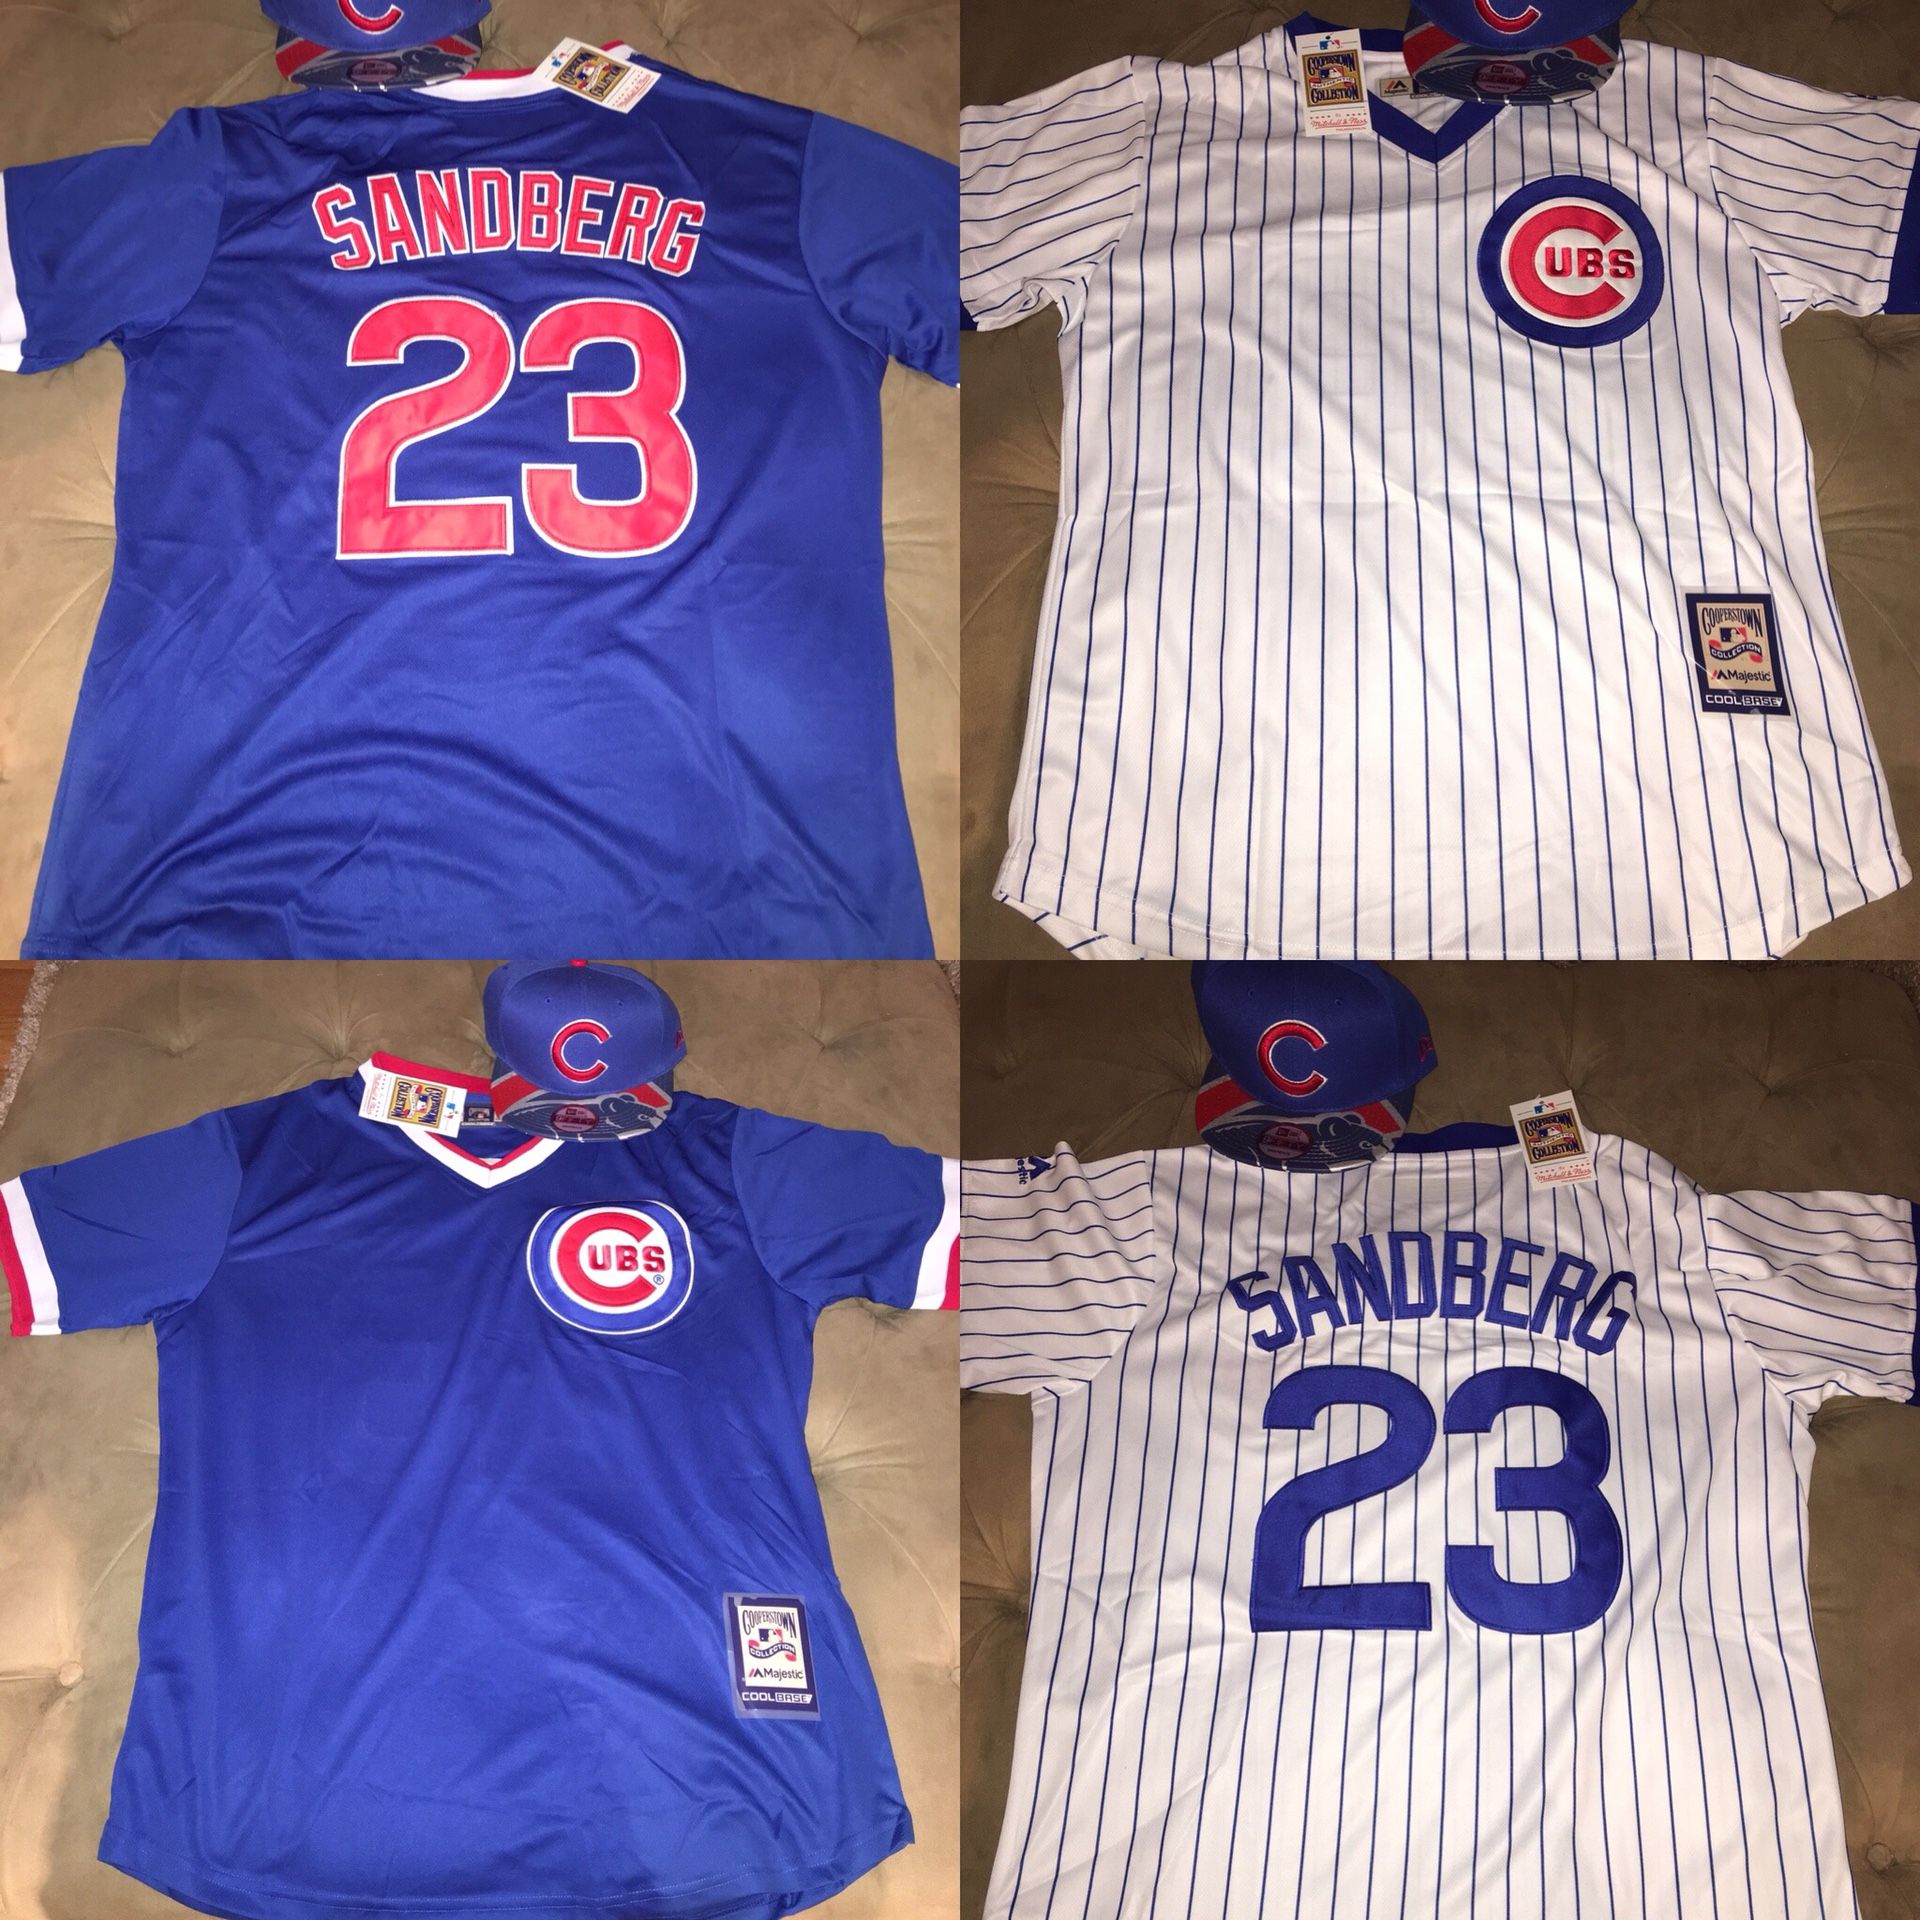 Sandberg Cubs baseball jersey combo brand new large/XL available 2 jerseys for $70 obo